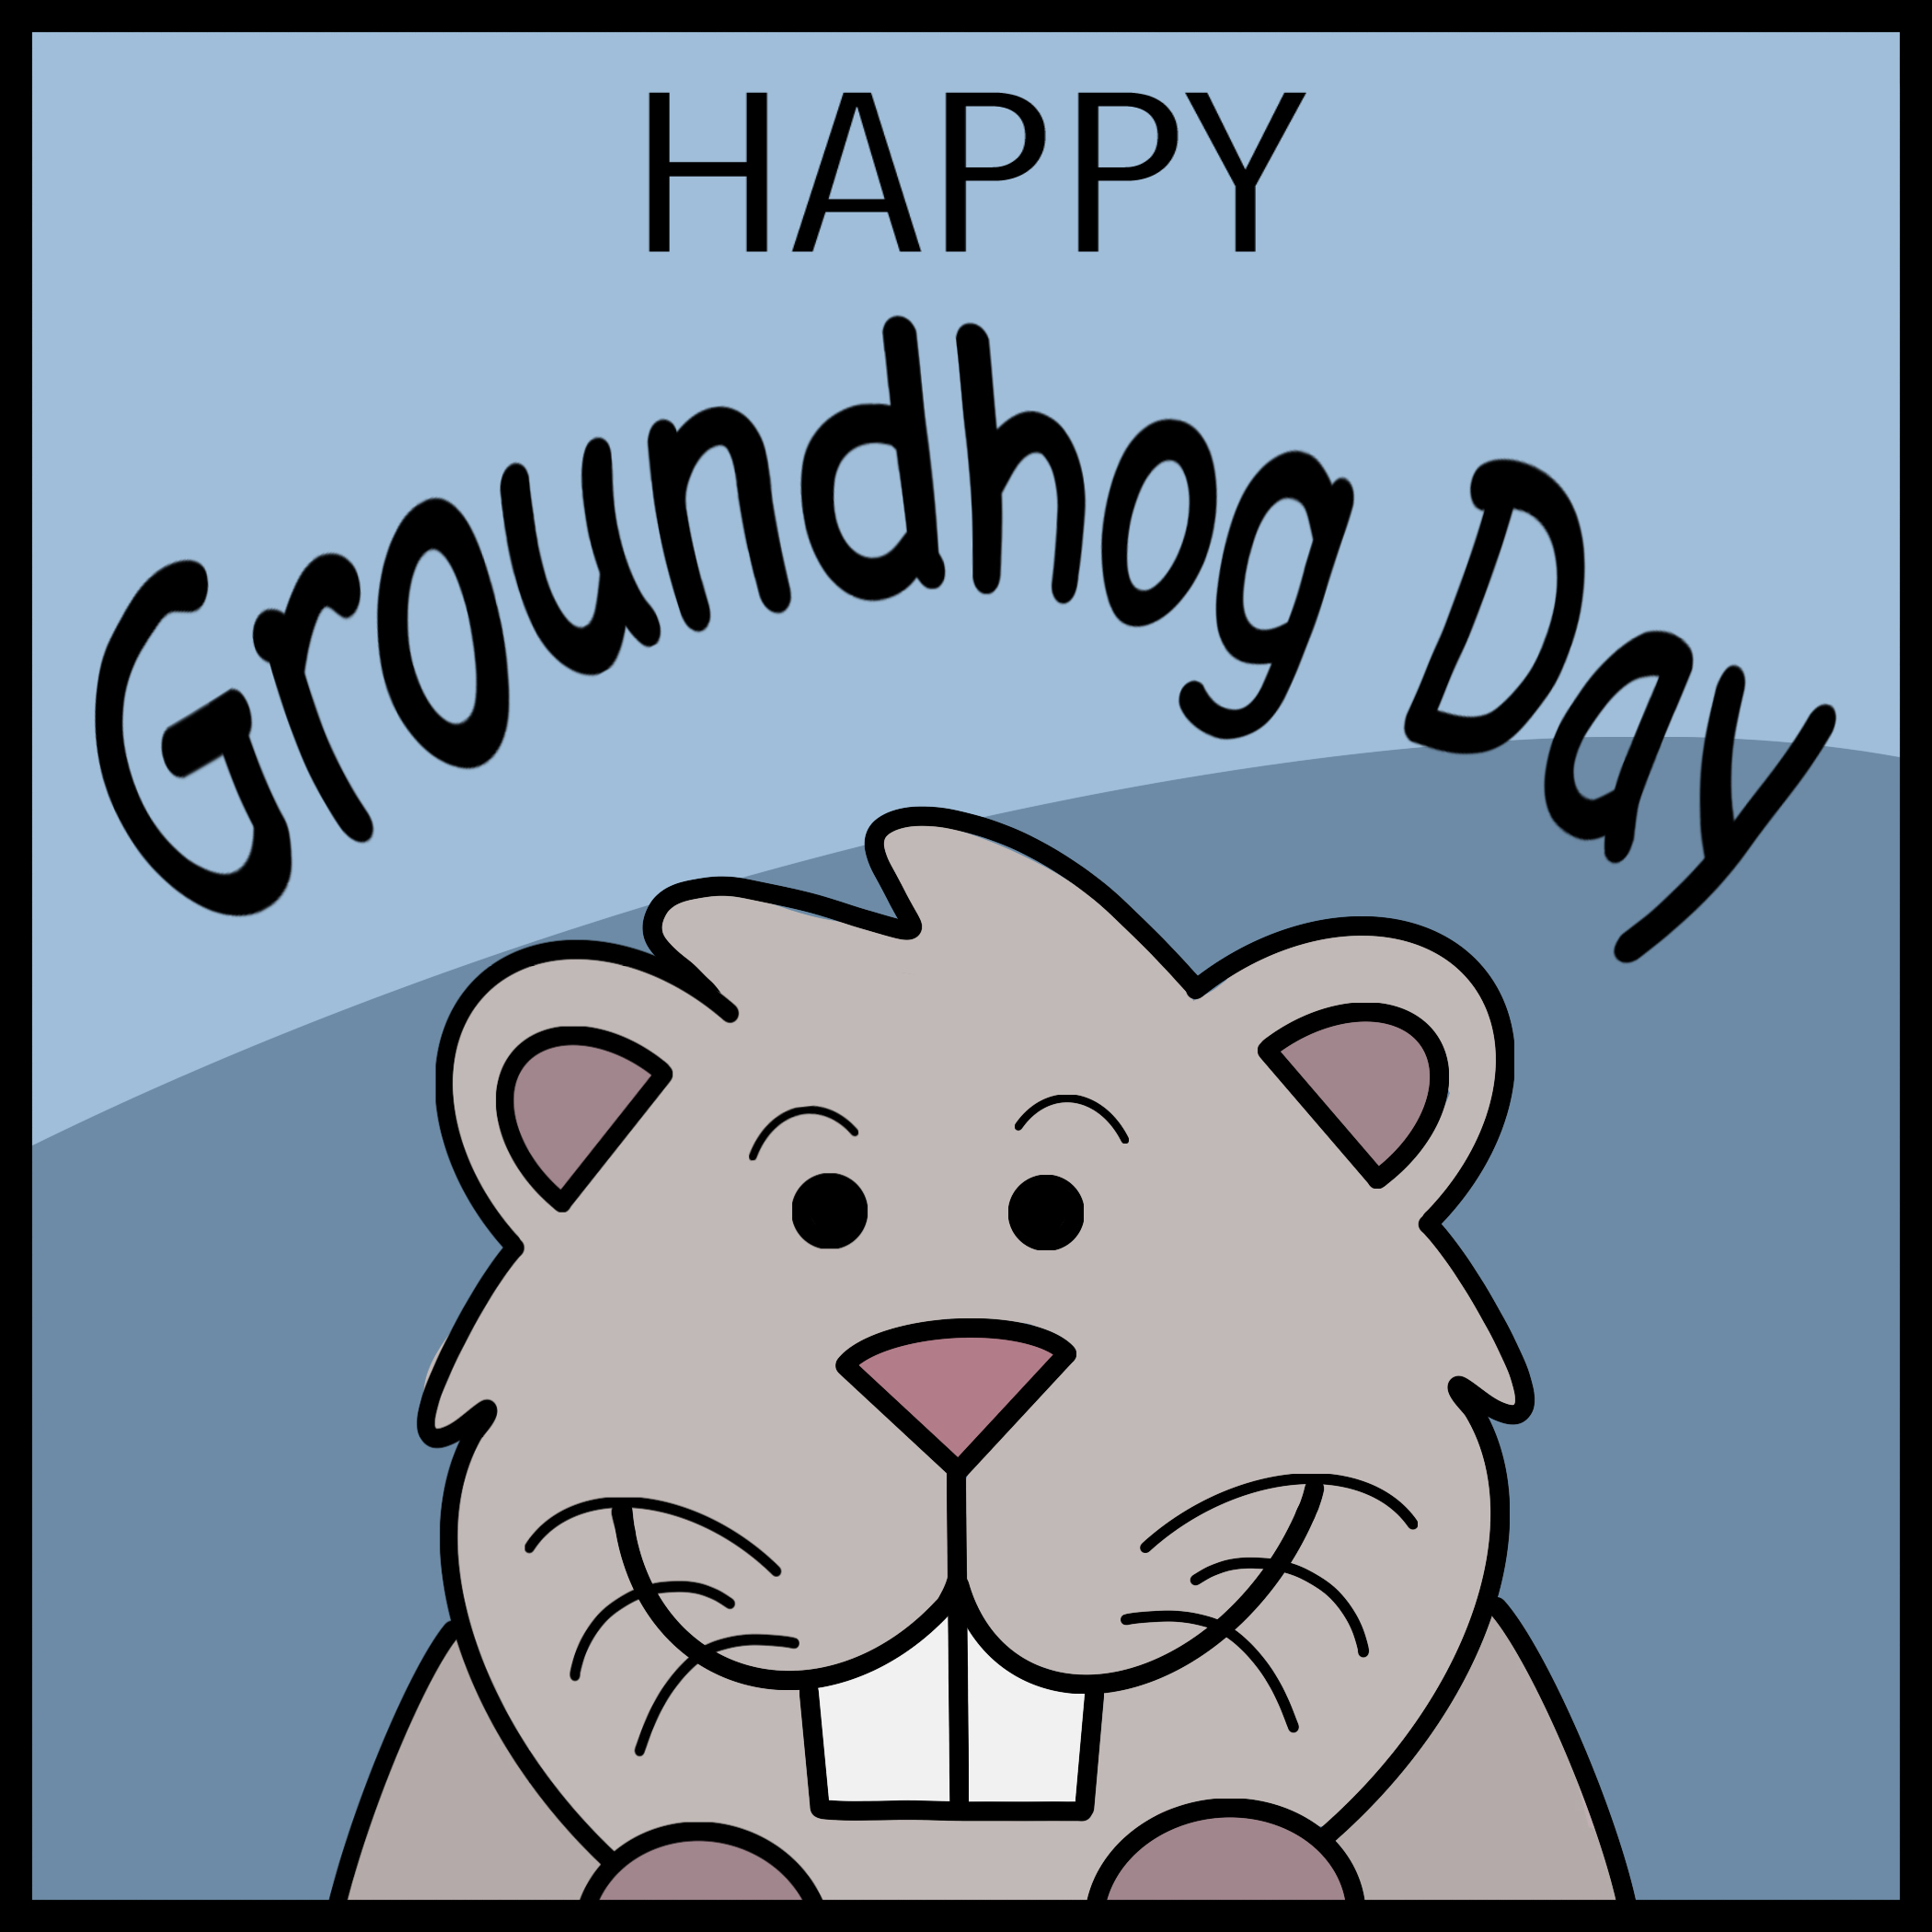 groundhog day party